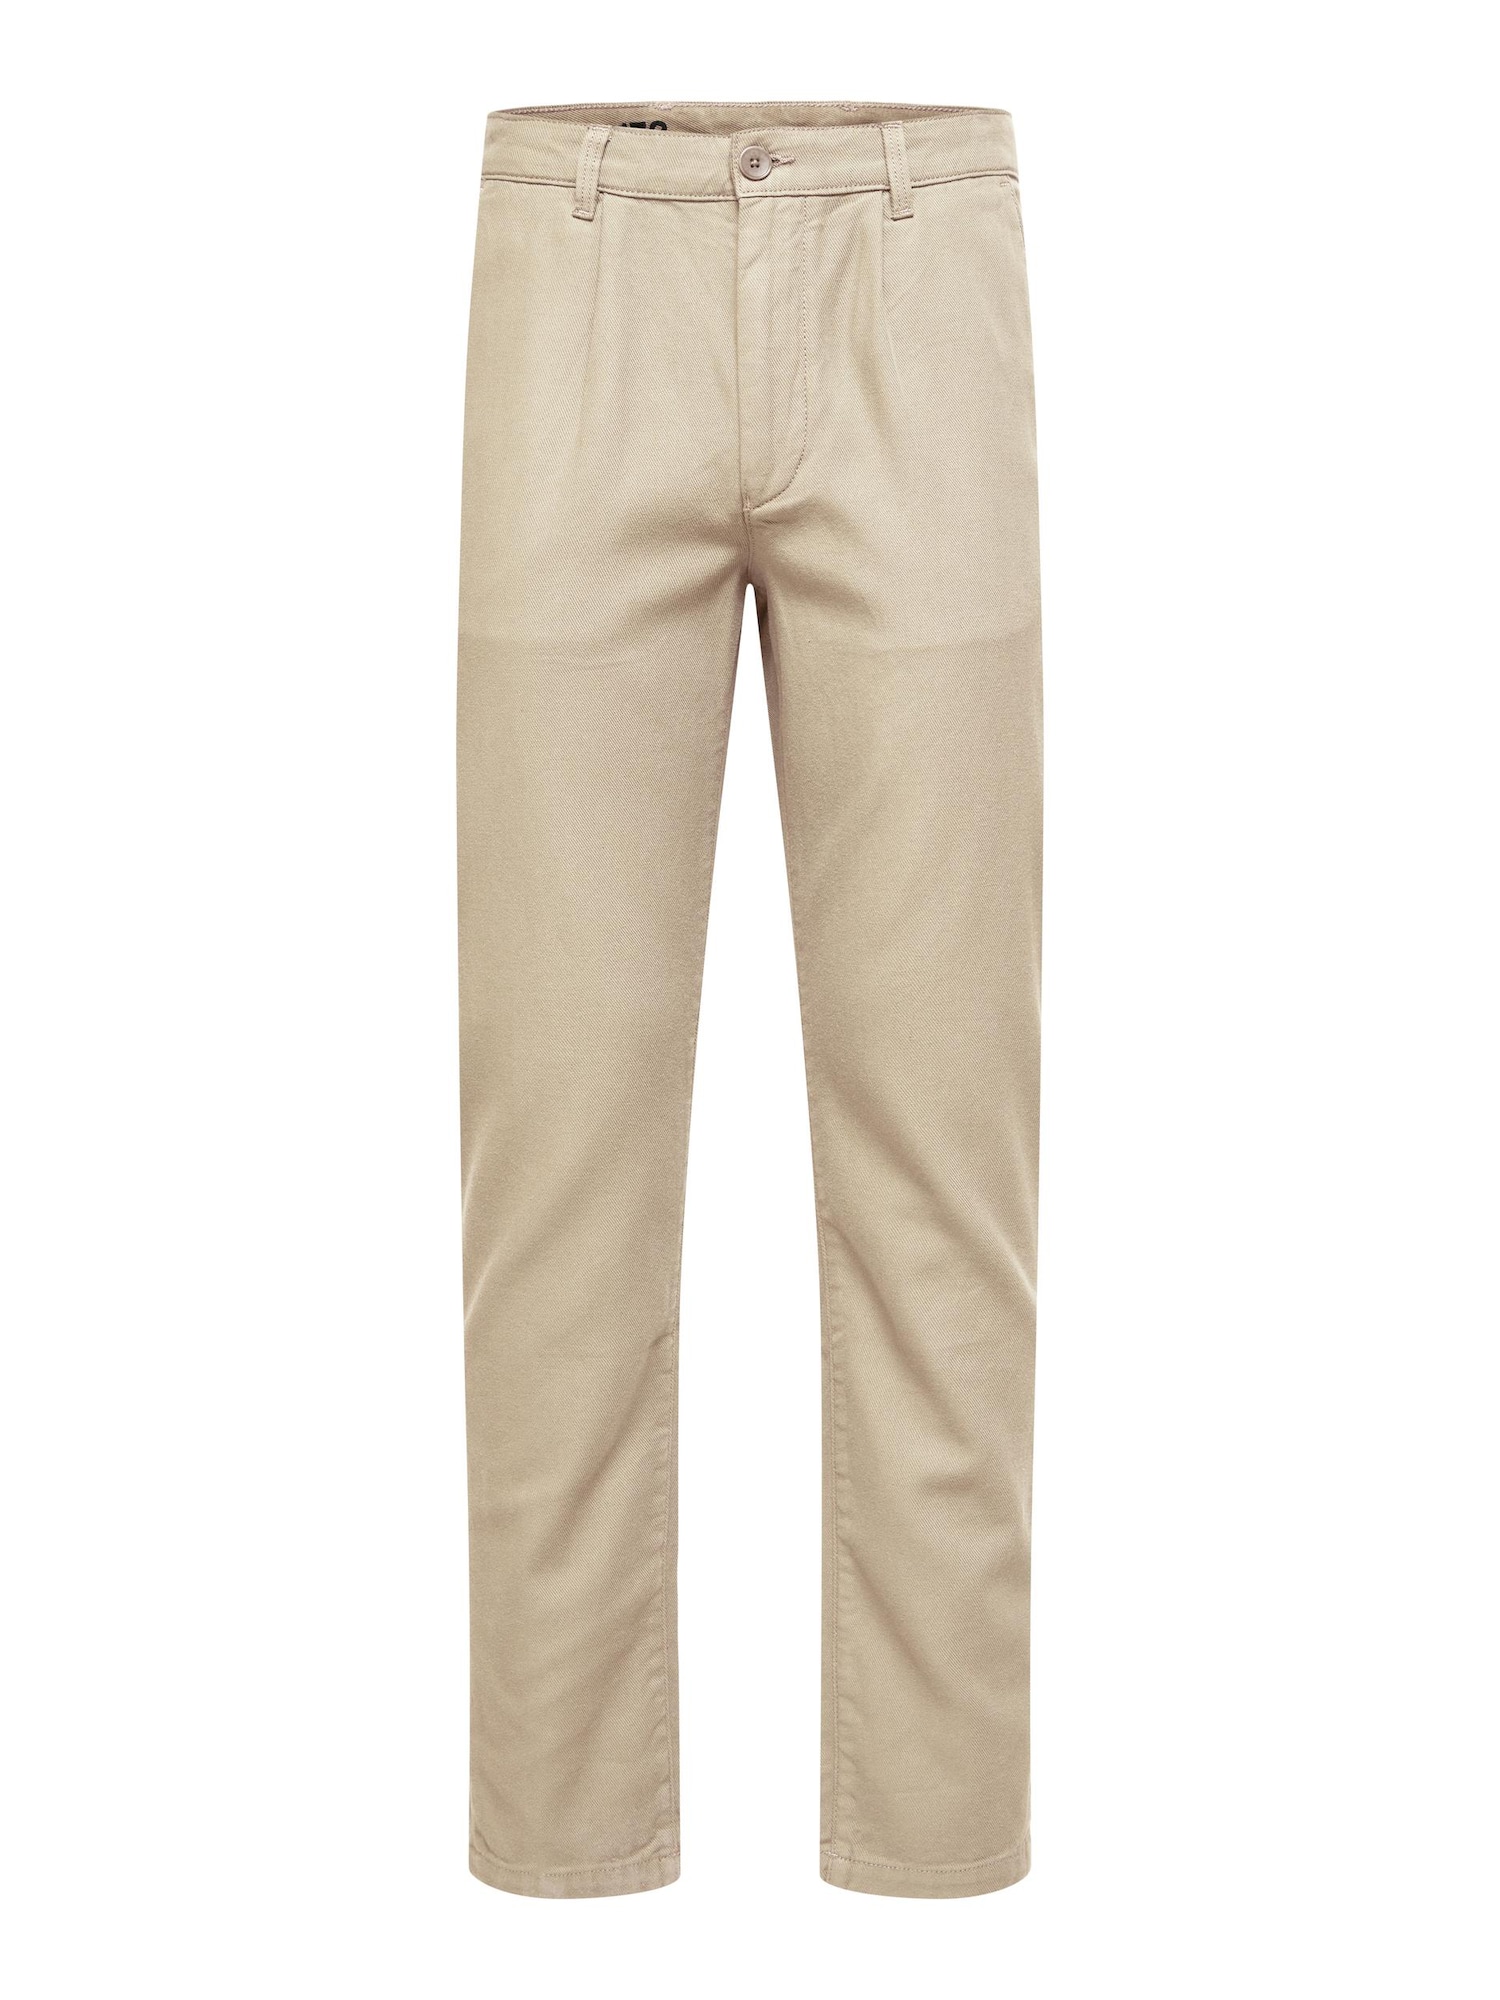 SELECTED HOMME Chino hlače 'Jax'  bež